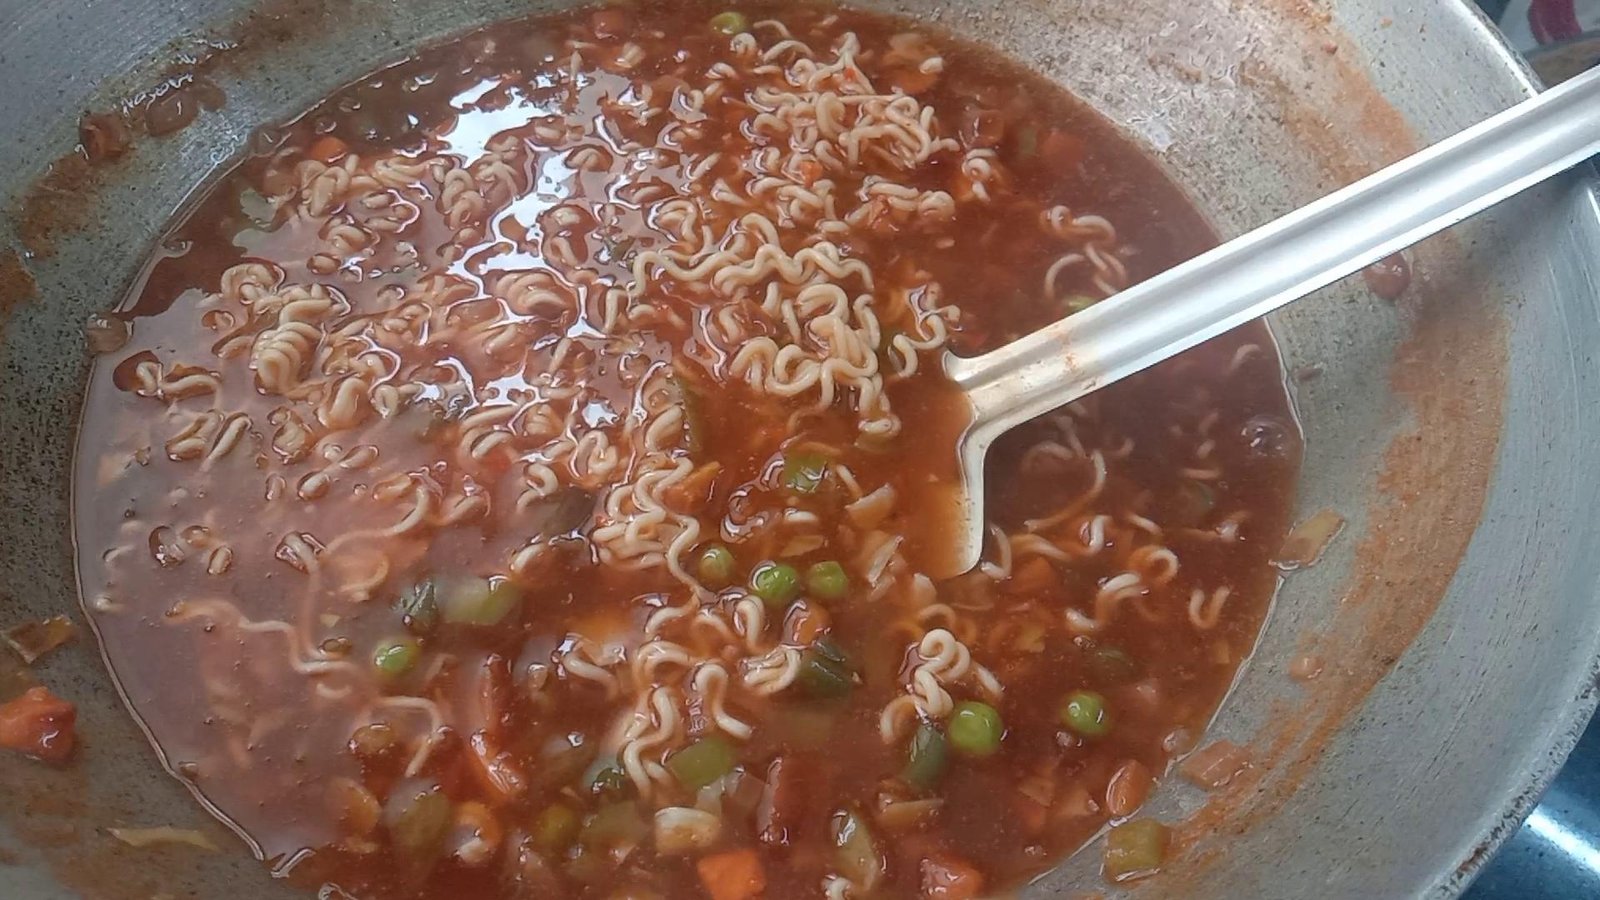 Mixing noodles with soup, Maggi noodles recipe. 